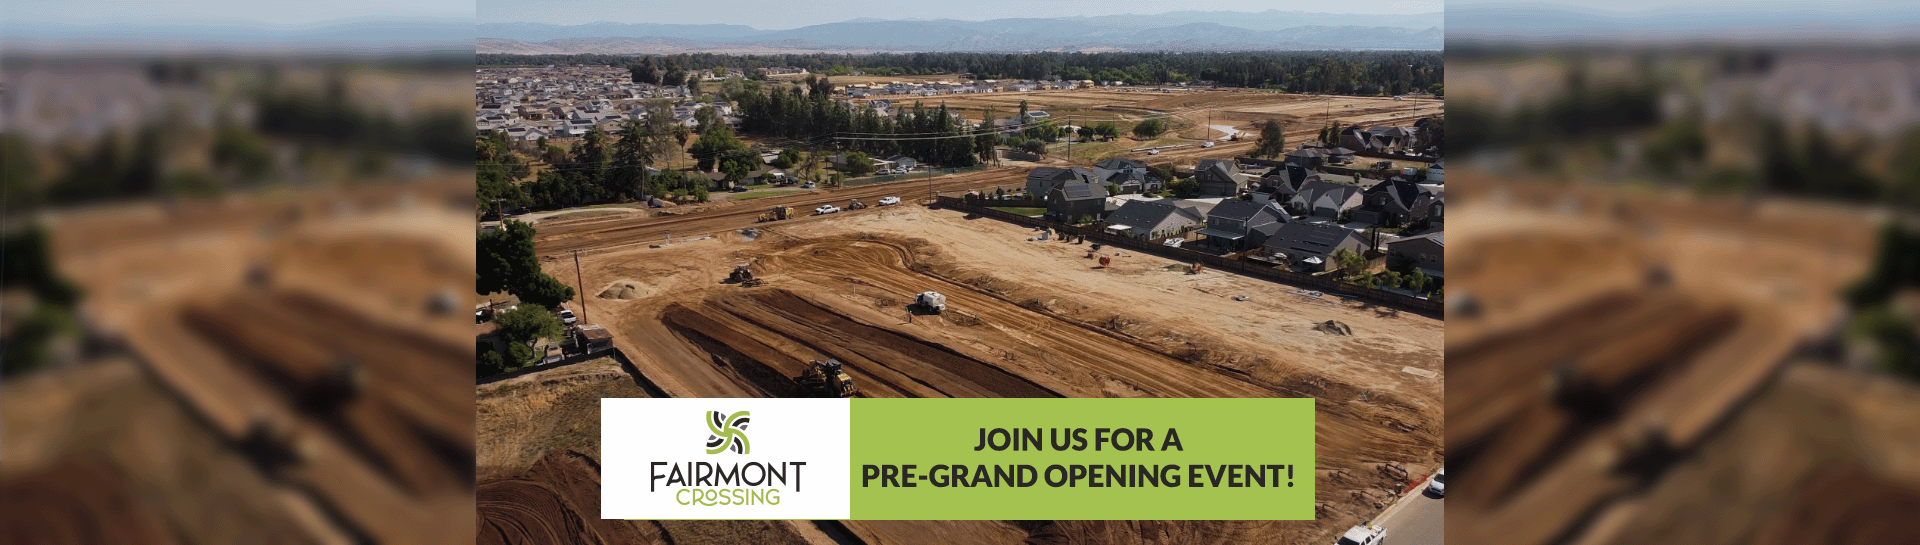 Join Us Saturday, April 30, For A Fairmont Crossing Pre-Grand Opening!